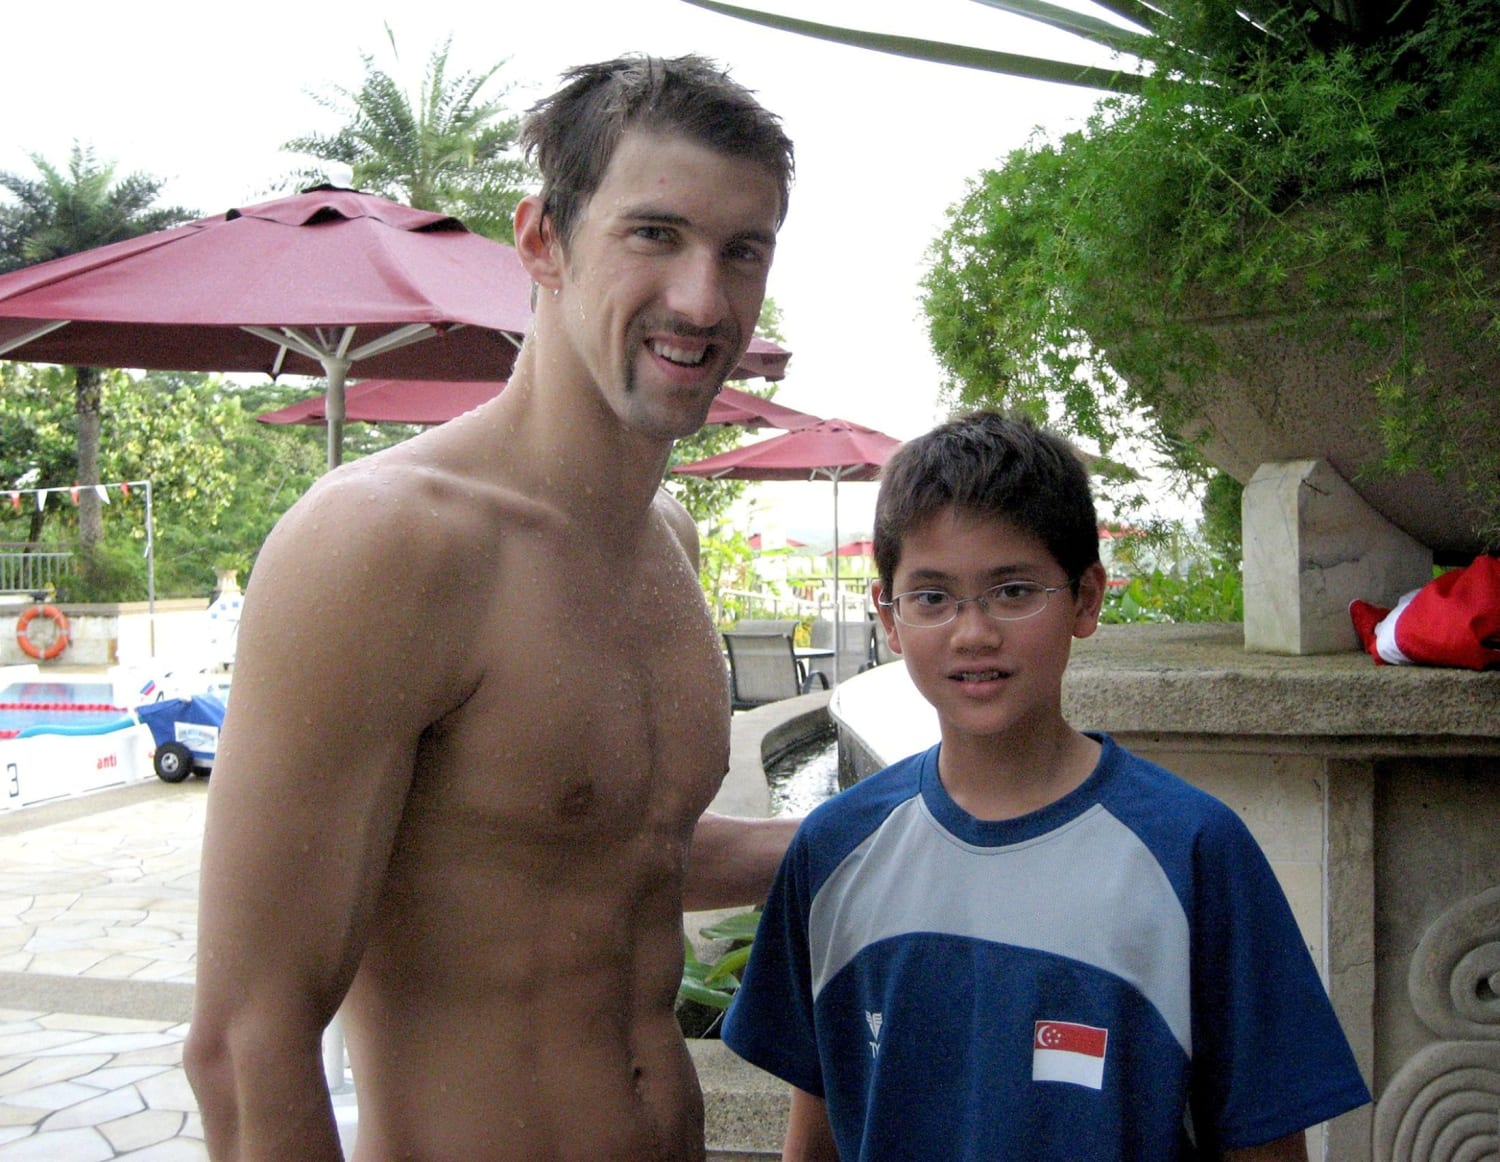 Phelps Loses to 21-Year-Old Joseph Schooling Who Idolized Him as a Boy